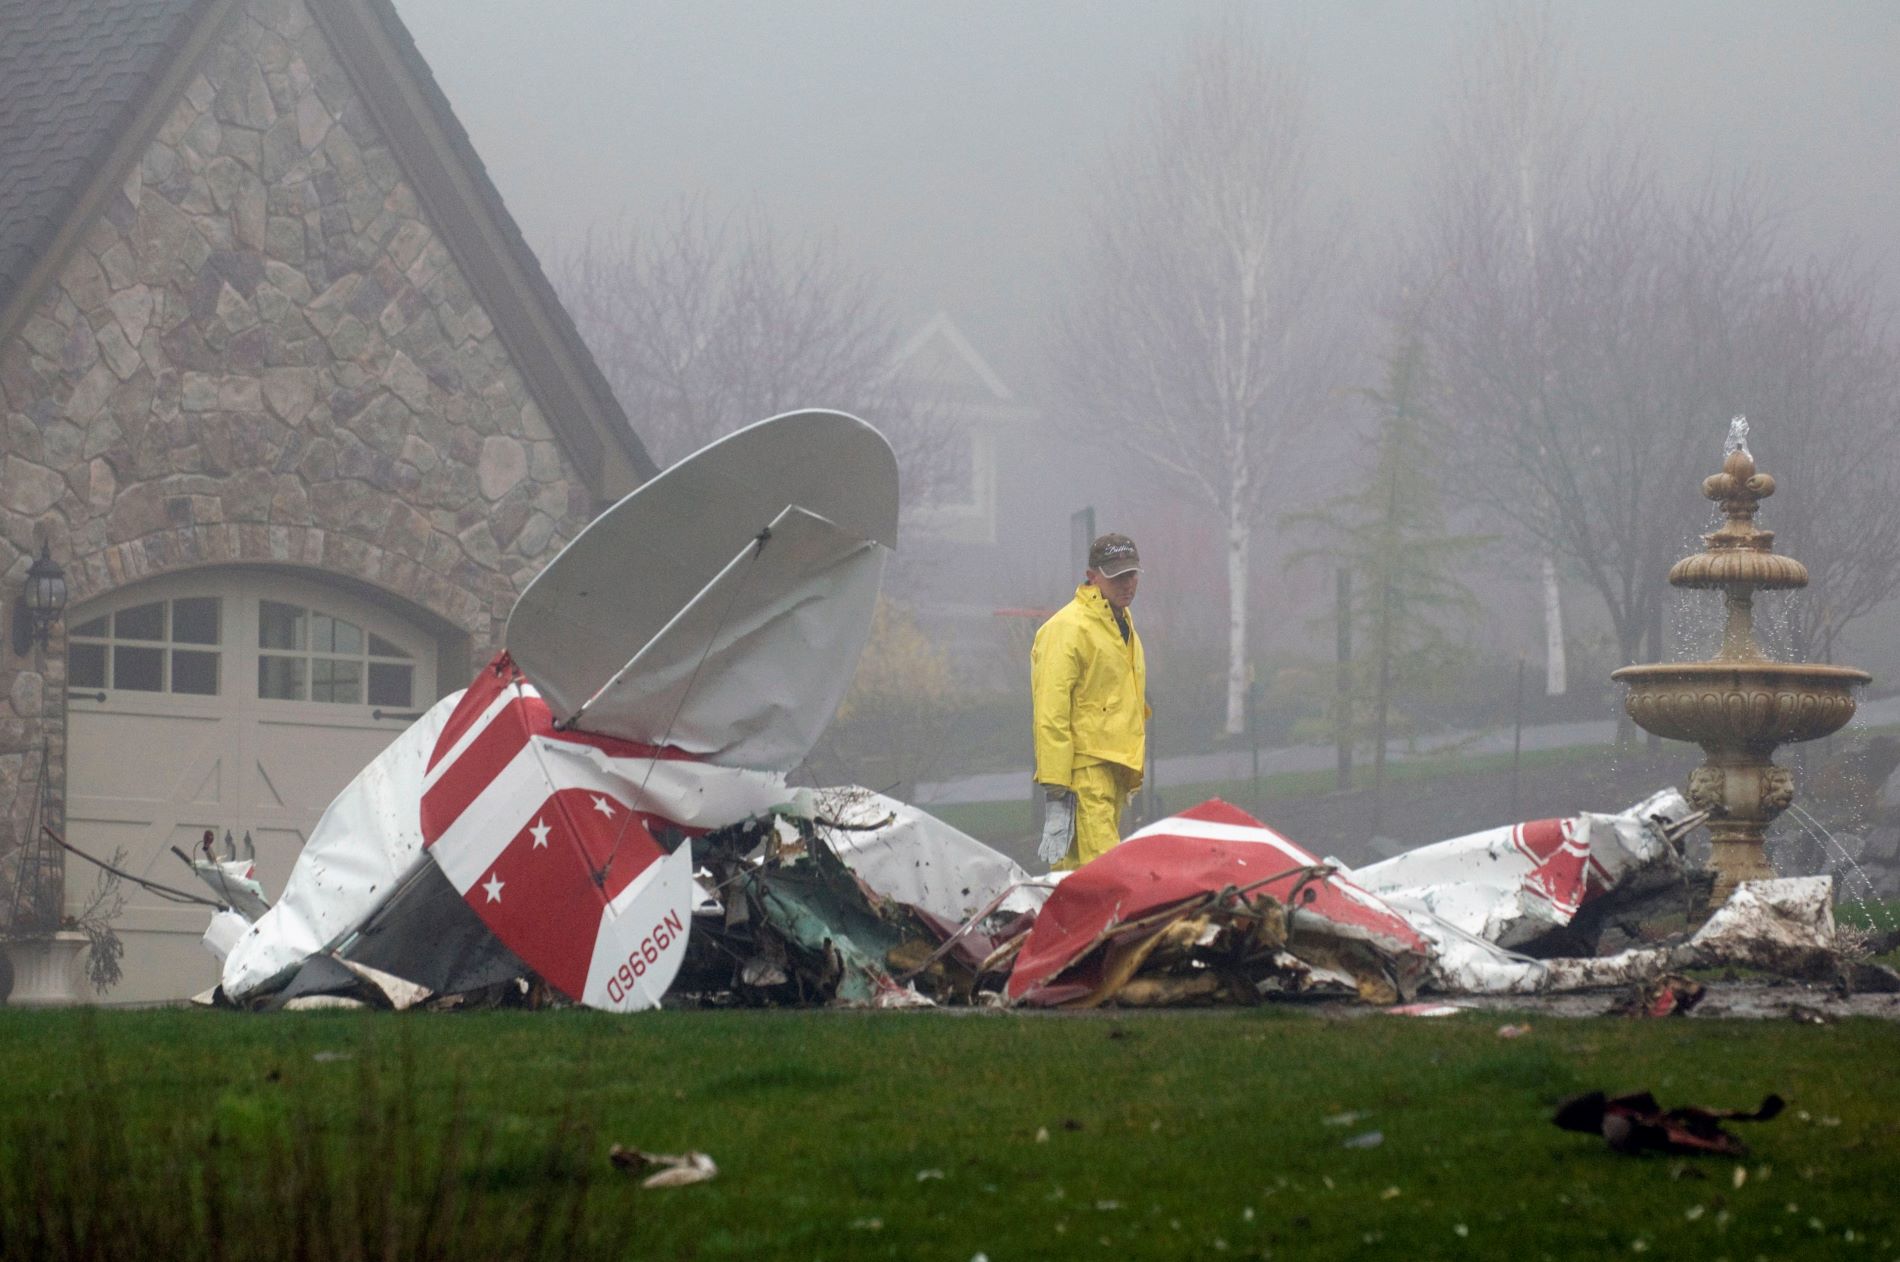 Tragic Incident: Small Plane Crashes Into Oregon Home, Claiming Two Lives